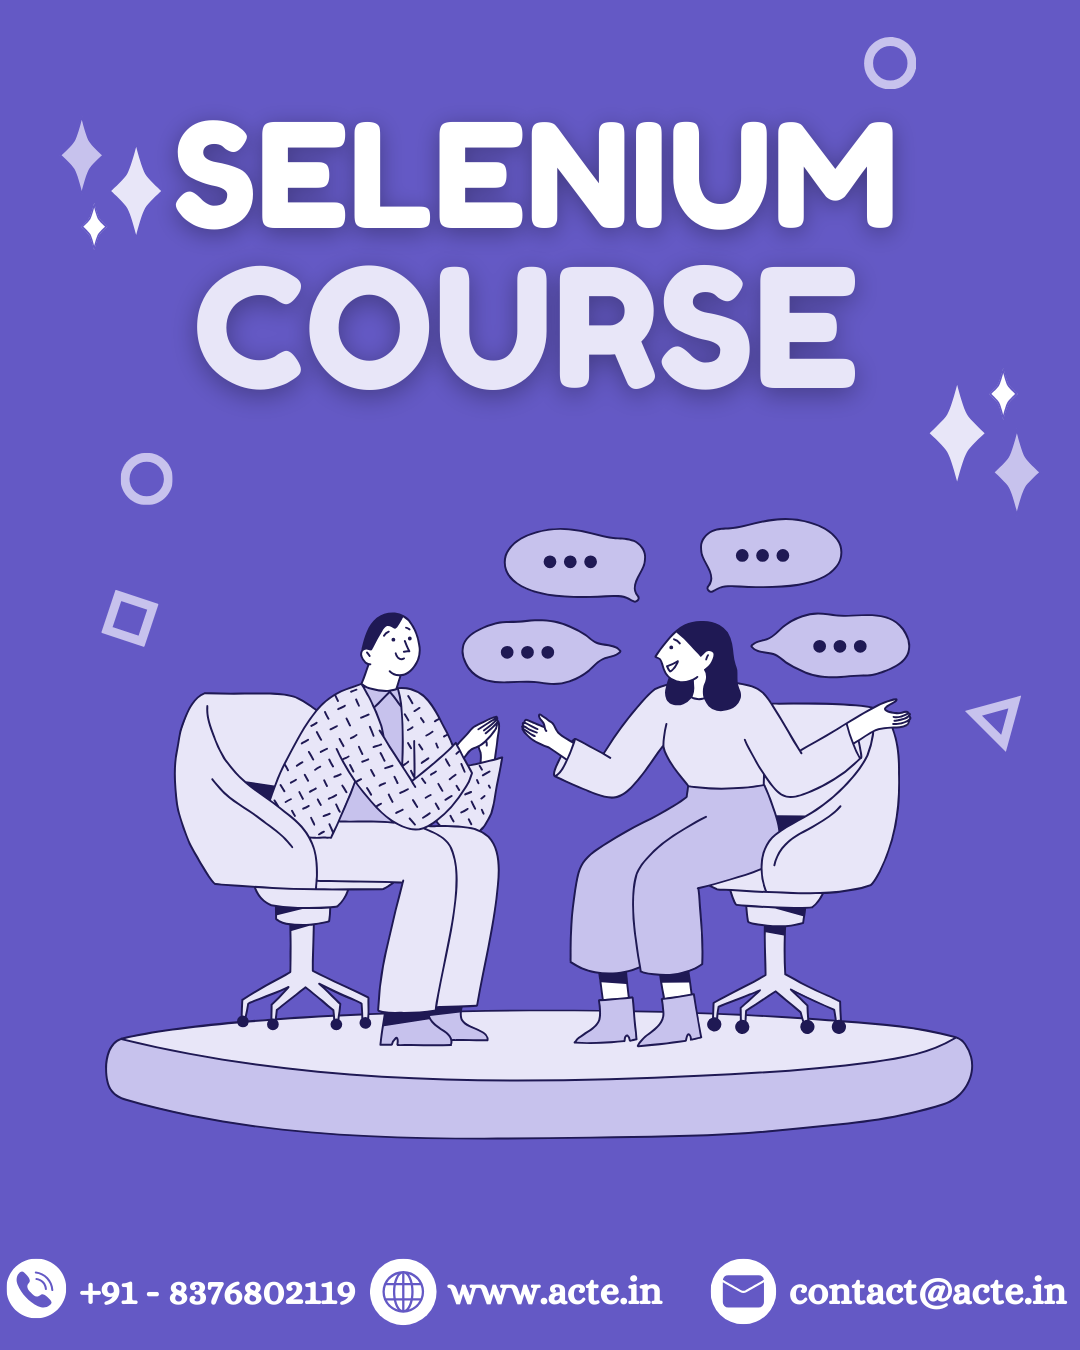 Unveiling the Abundant Opportunities in the World of Selenium Jobs: Growth, Development, and Networking